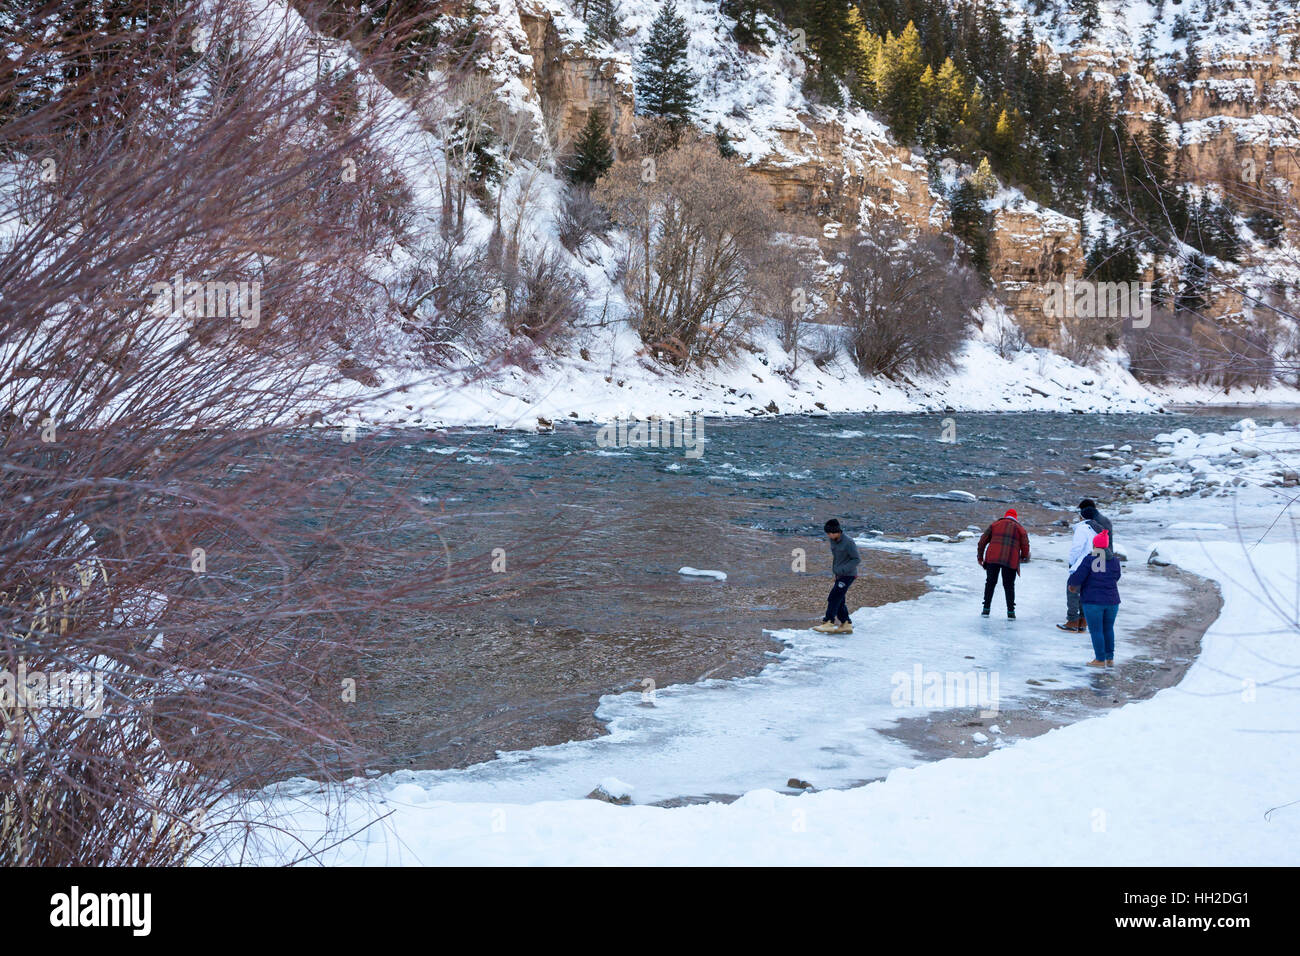 Glenwood Springs, Colorado - Visitors walk on the winter ice at the edge of the Colorado River in Glenwood Canyon. Stock Photo